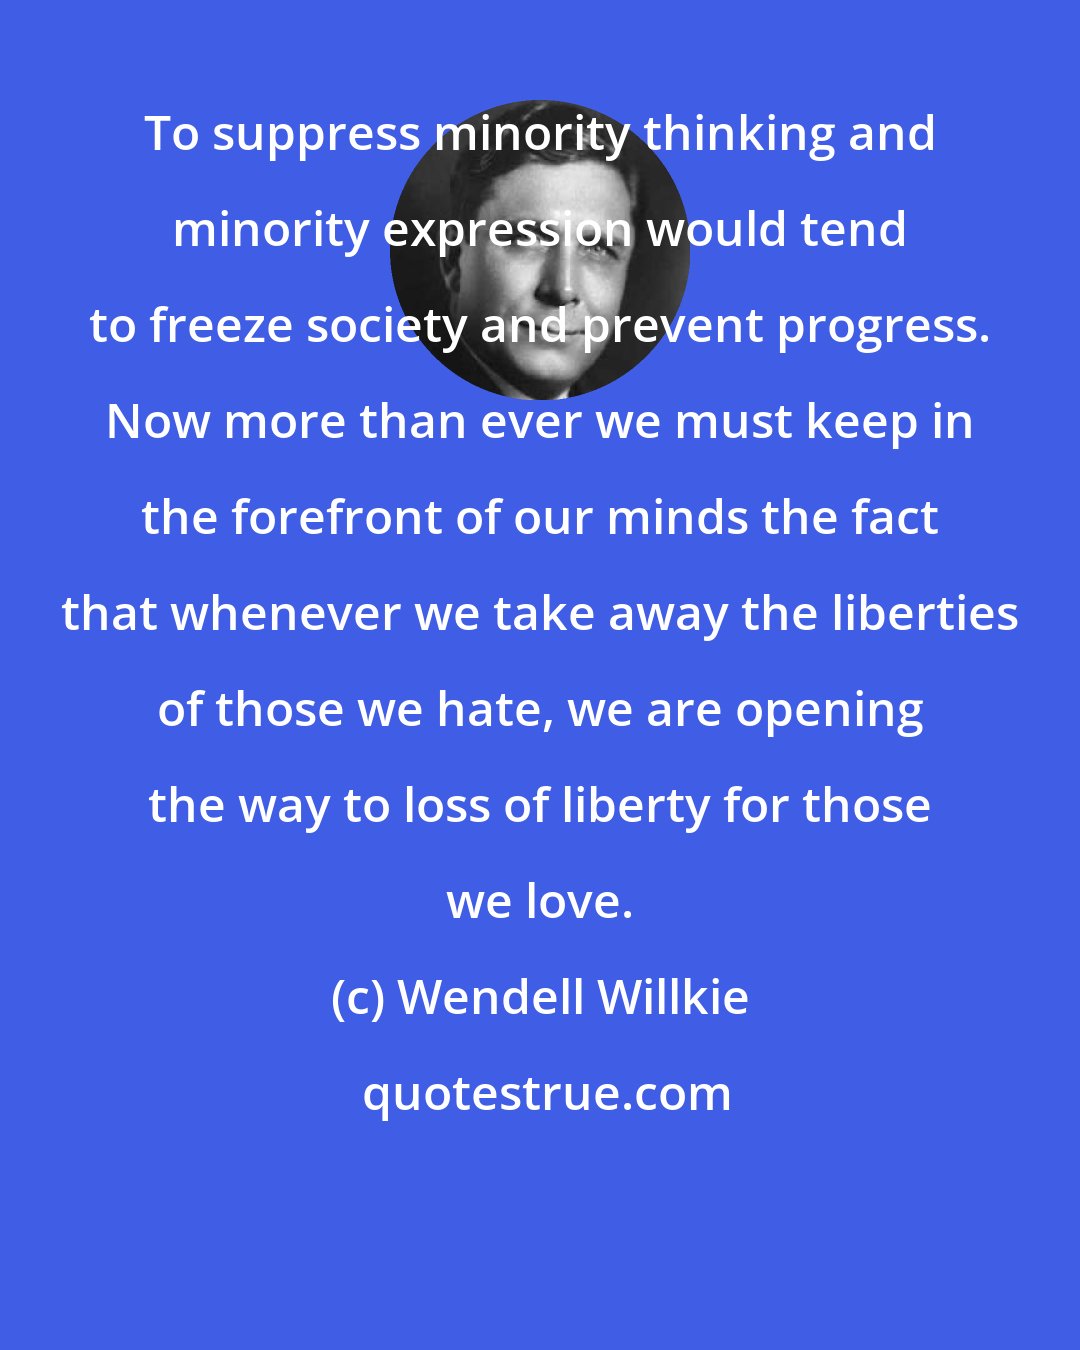 Wendell Willkie: To suppress minority thinking and minority expression would tend to freeze society and prevent progress. Now more than ever we must keep in the forefront of our minds the fact that whenever we take away the liberties of those we hate, we are opening the way to loss of liberty for those we love.